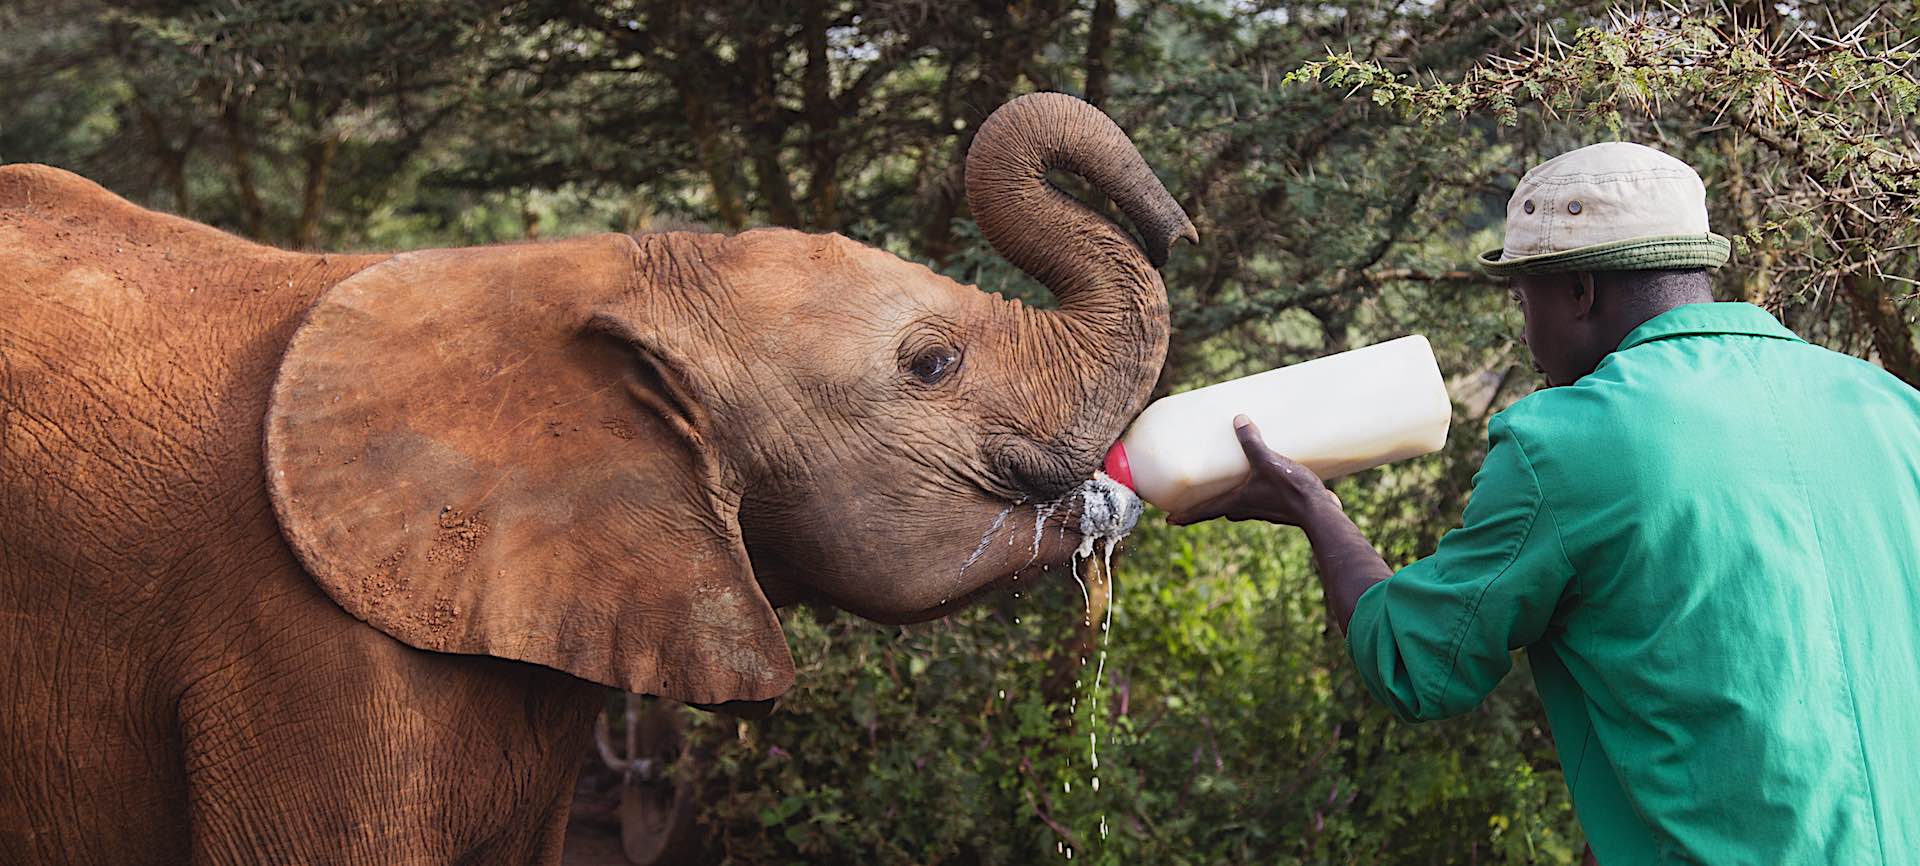 An orphaned elephant calf being fed milk by its Keeper